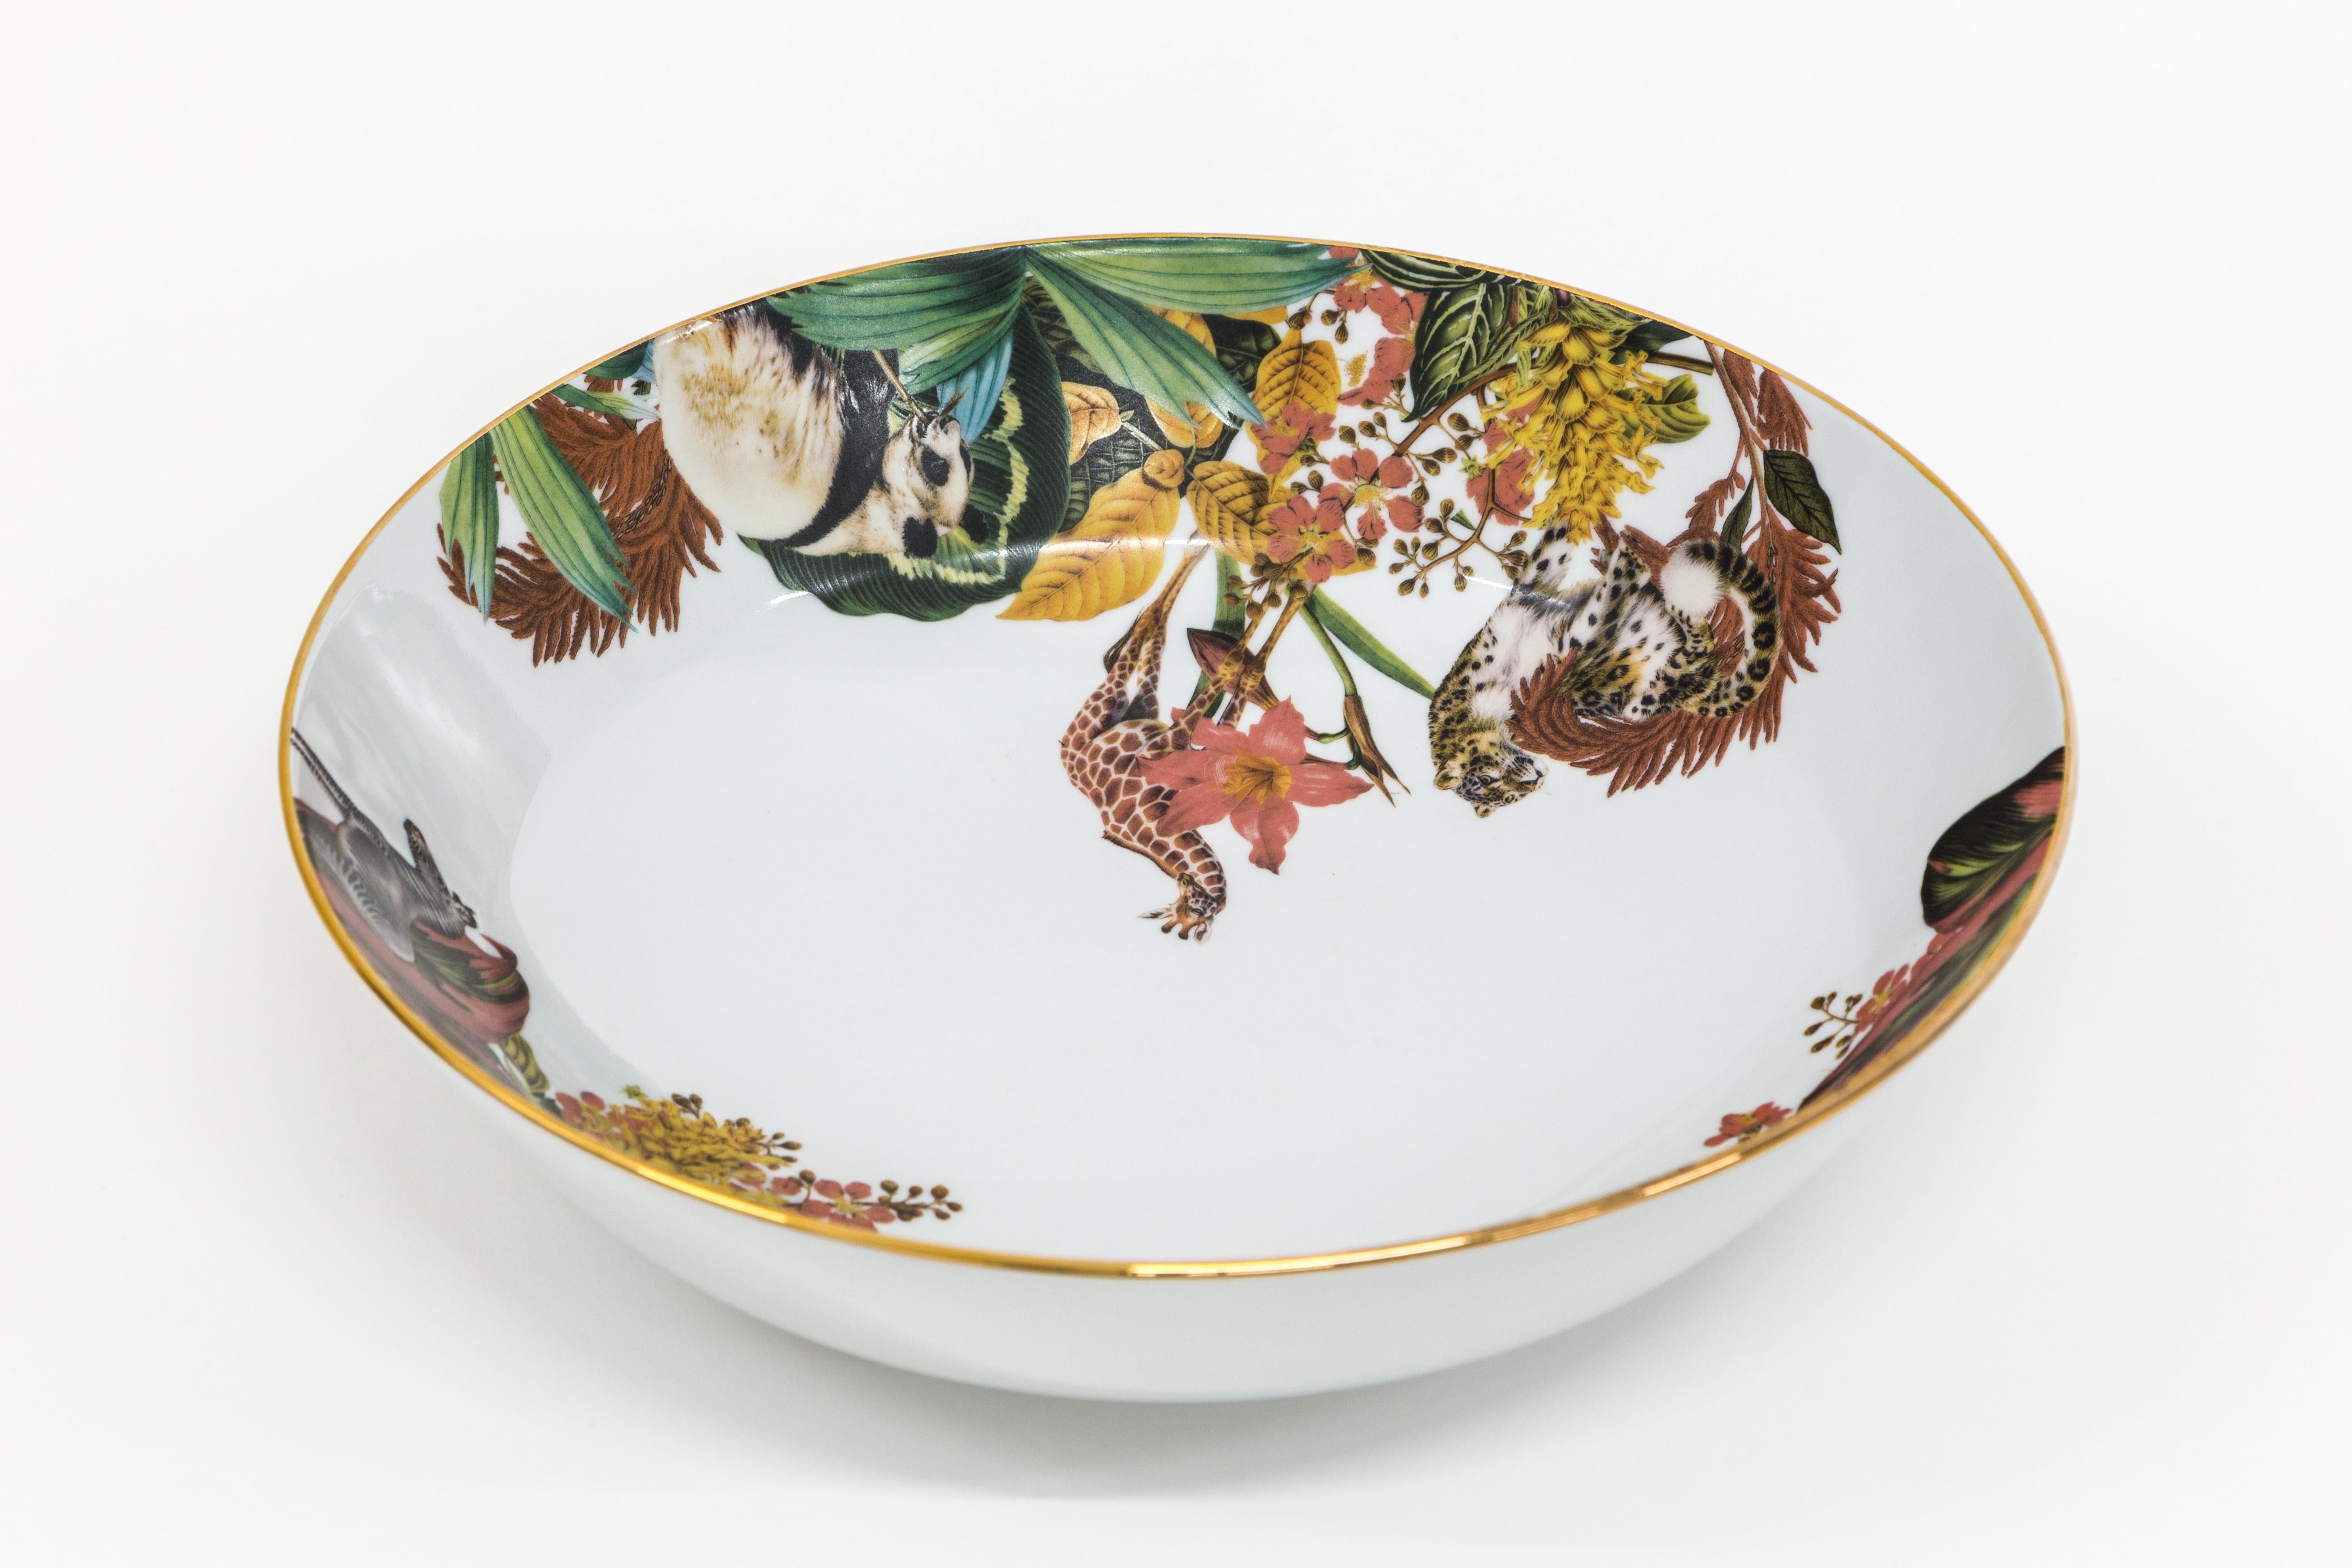 This 34cm diameter bowl is part of the Animalia collection by Grand Tour By Vito Nesta. The very versatile shape is suitable as a fruit stand, table centerpiece or ornamental bowl on any shelf. The rich design of tropical flowers hides several